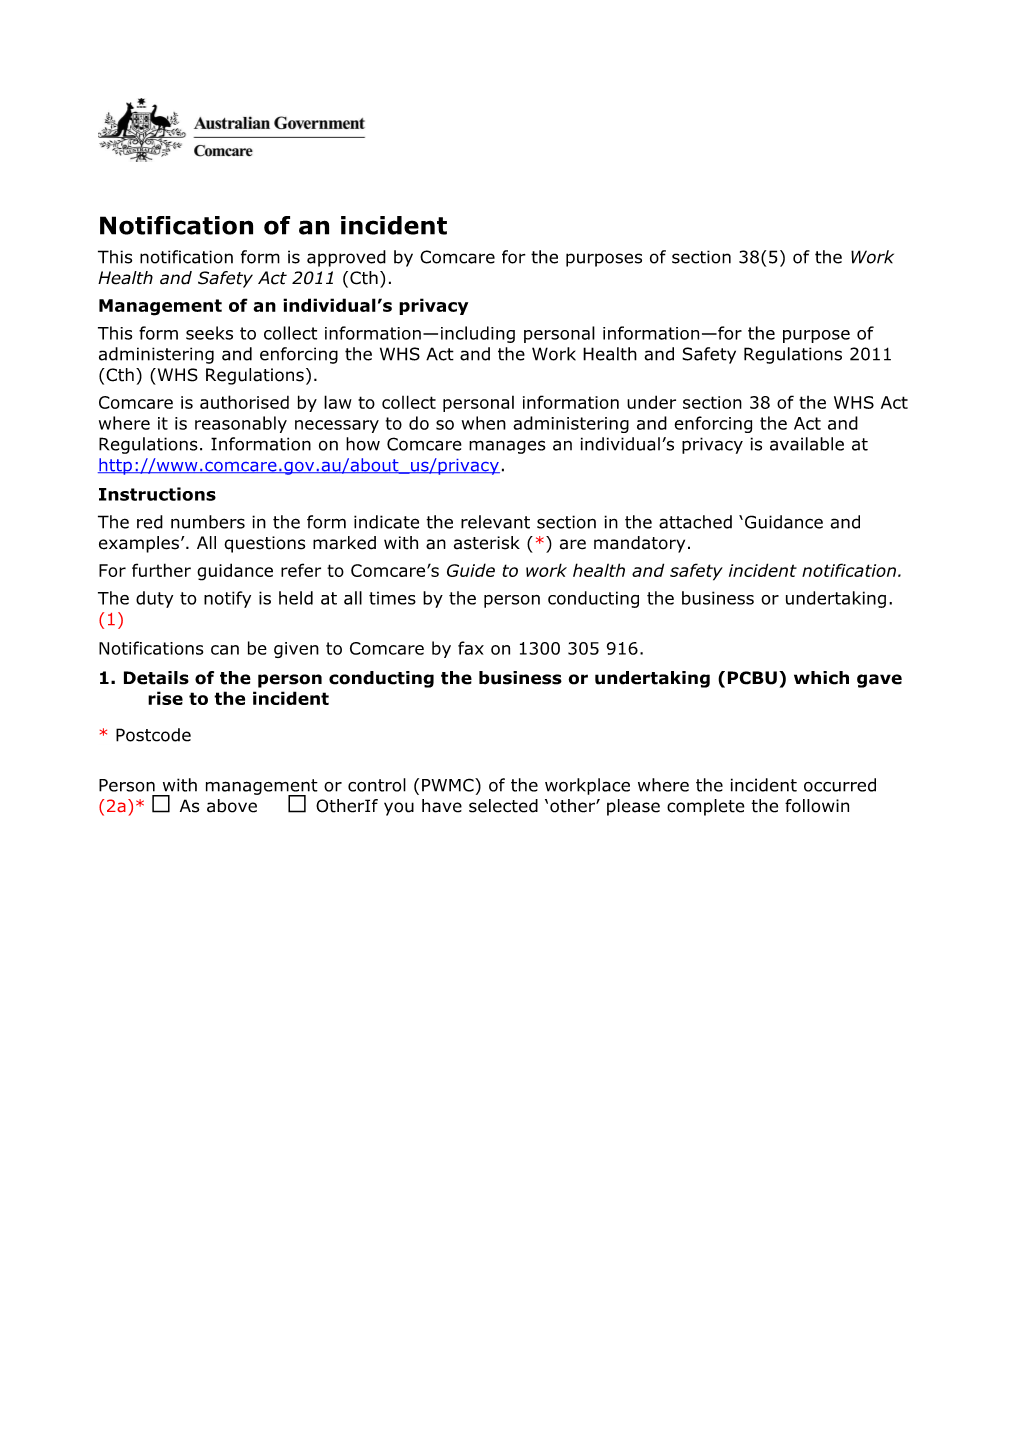 Notification Of Incidents Occurring On Or After 1 January 2012